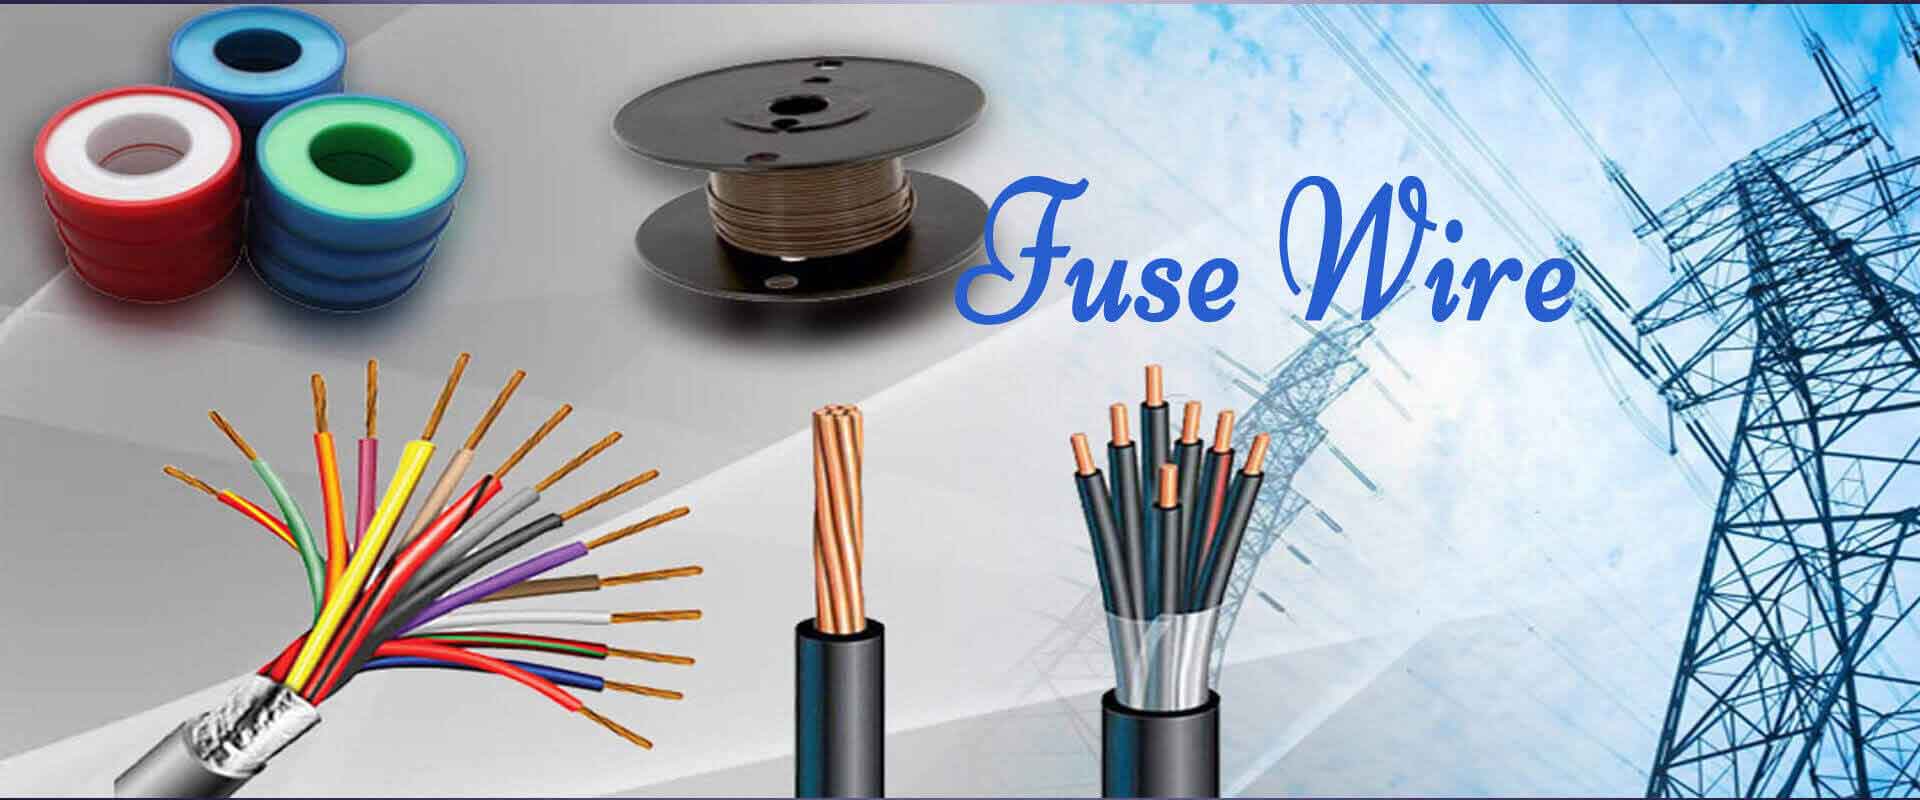 Silver Plated Copper Wire For Fuse In Newcastle Upon Tyne